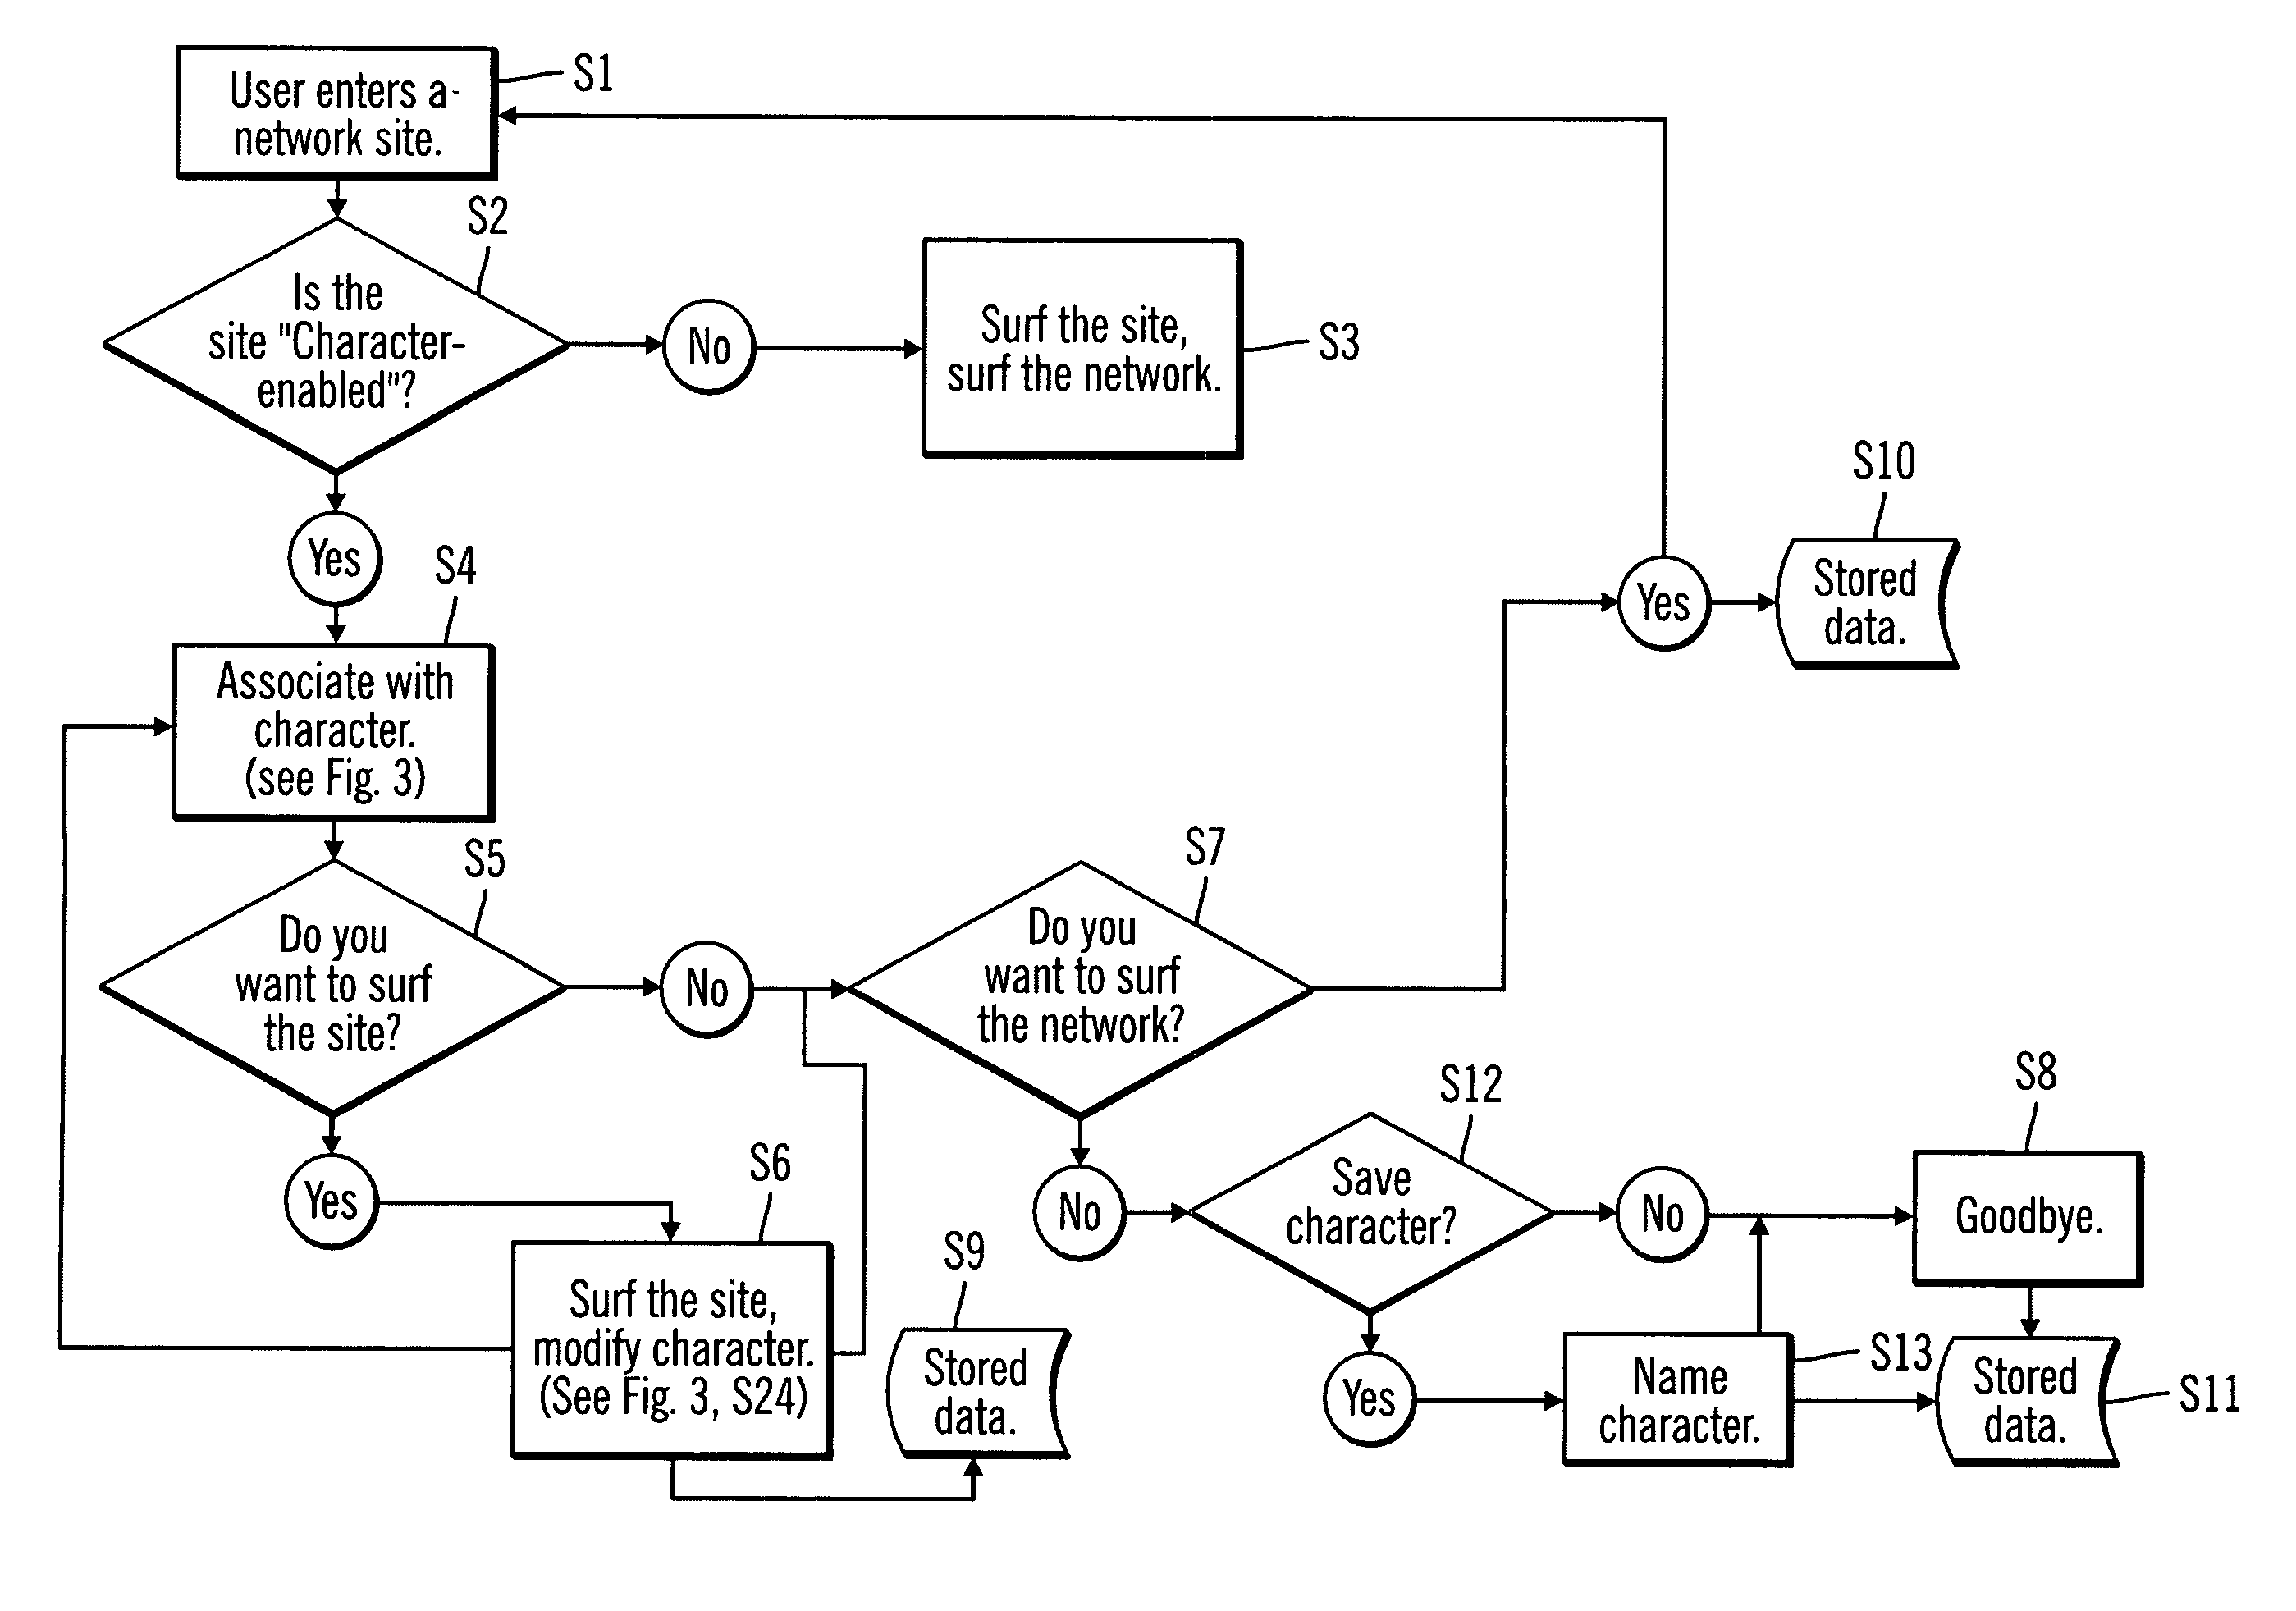 Method and system for presenting data over a network based on network user choices and collecting real-time data related to said choices